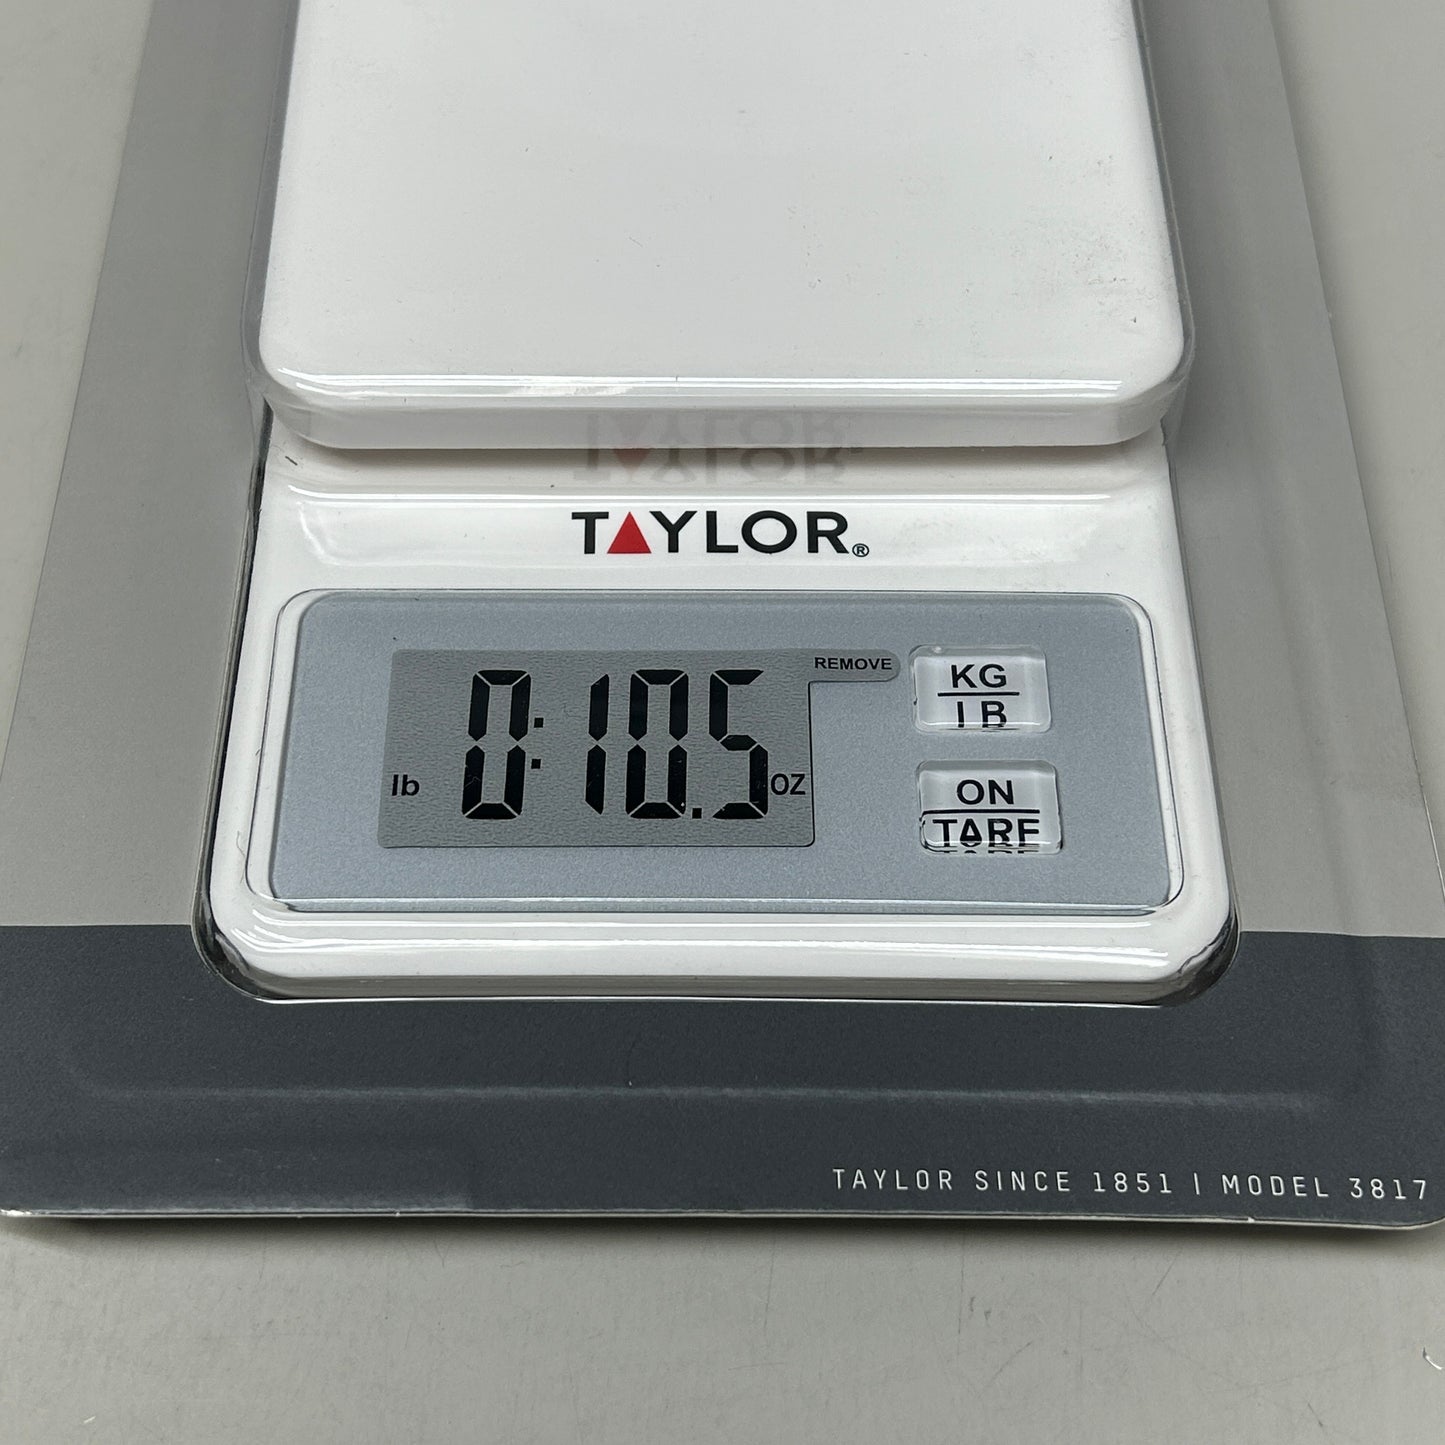 TAYLOR Compact Digital Kitchen Scale White (New)